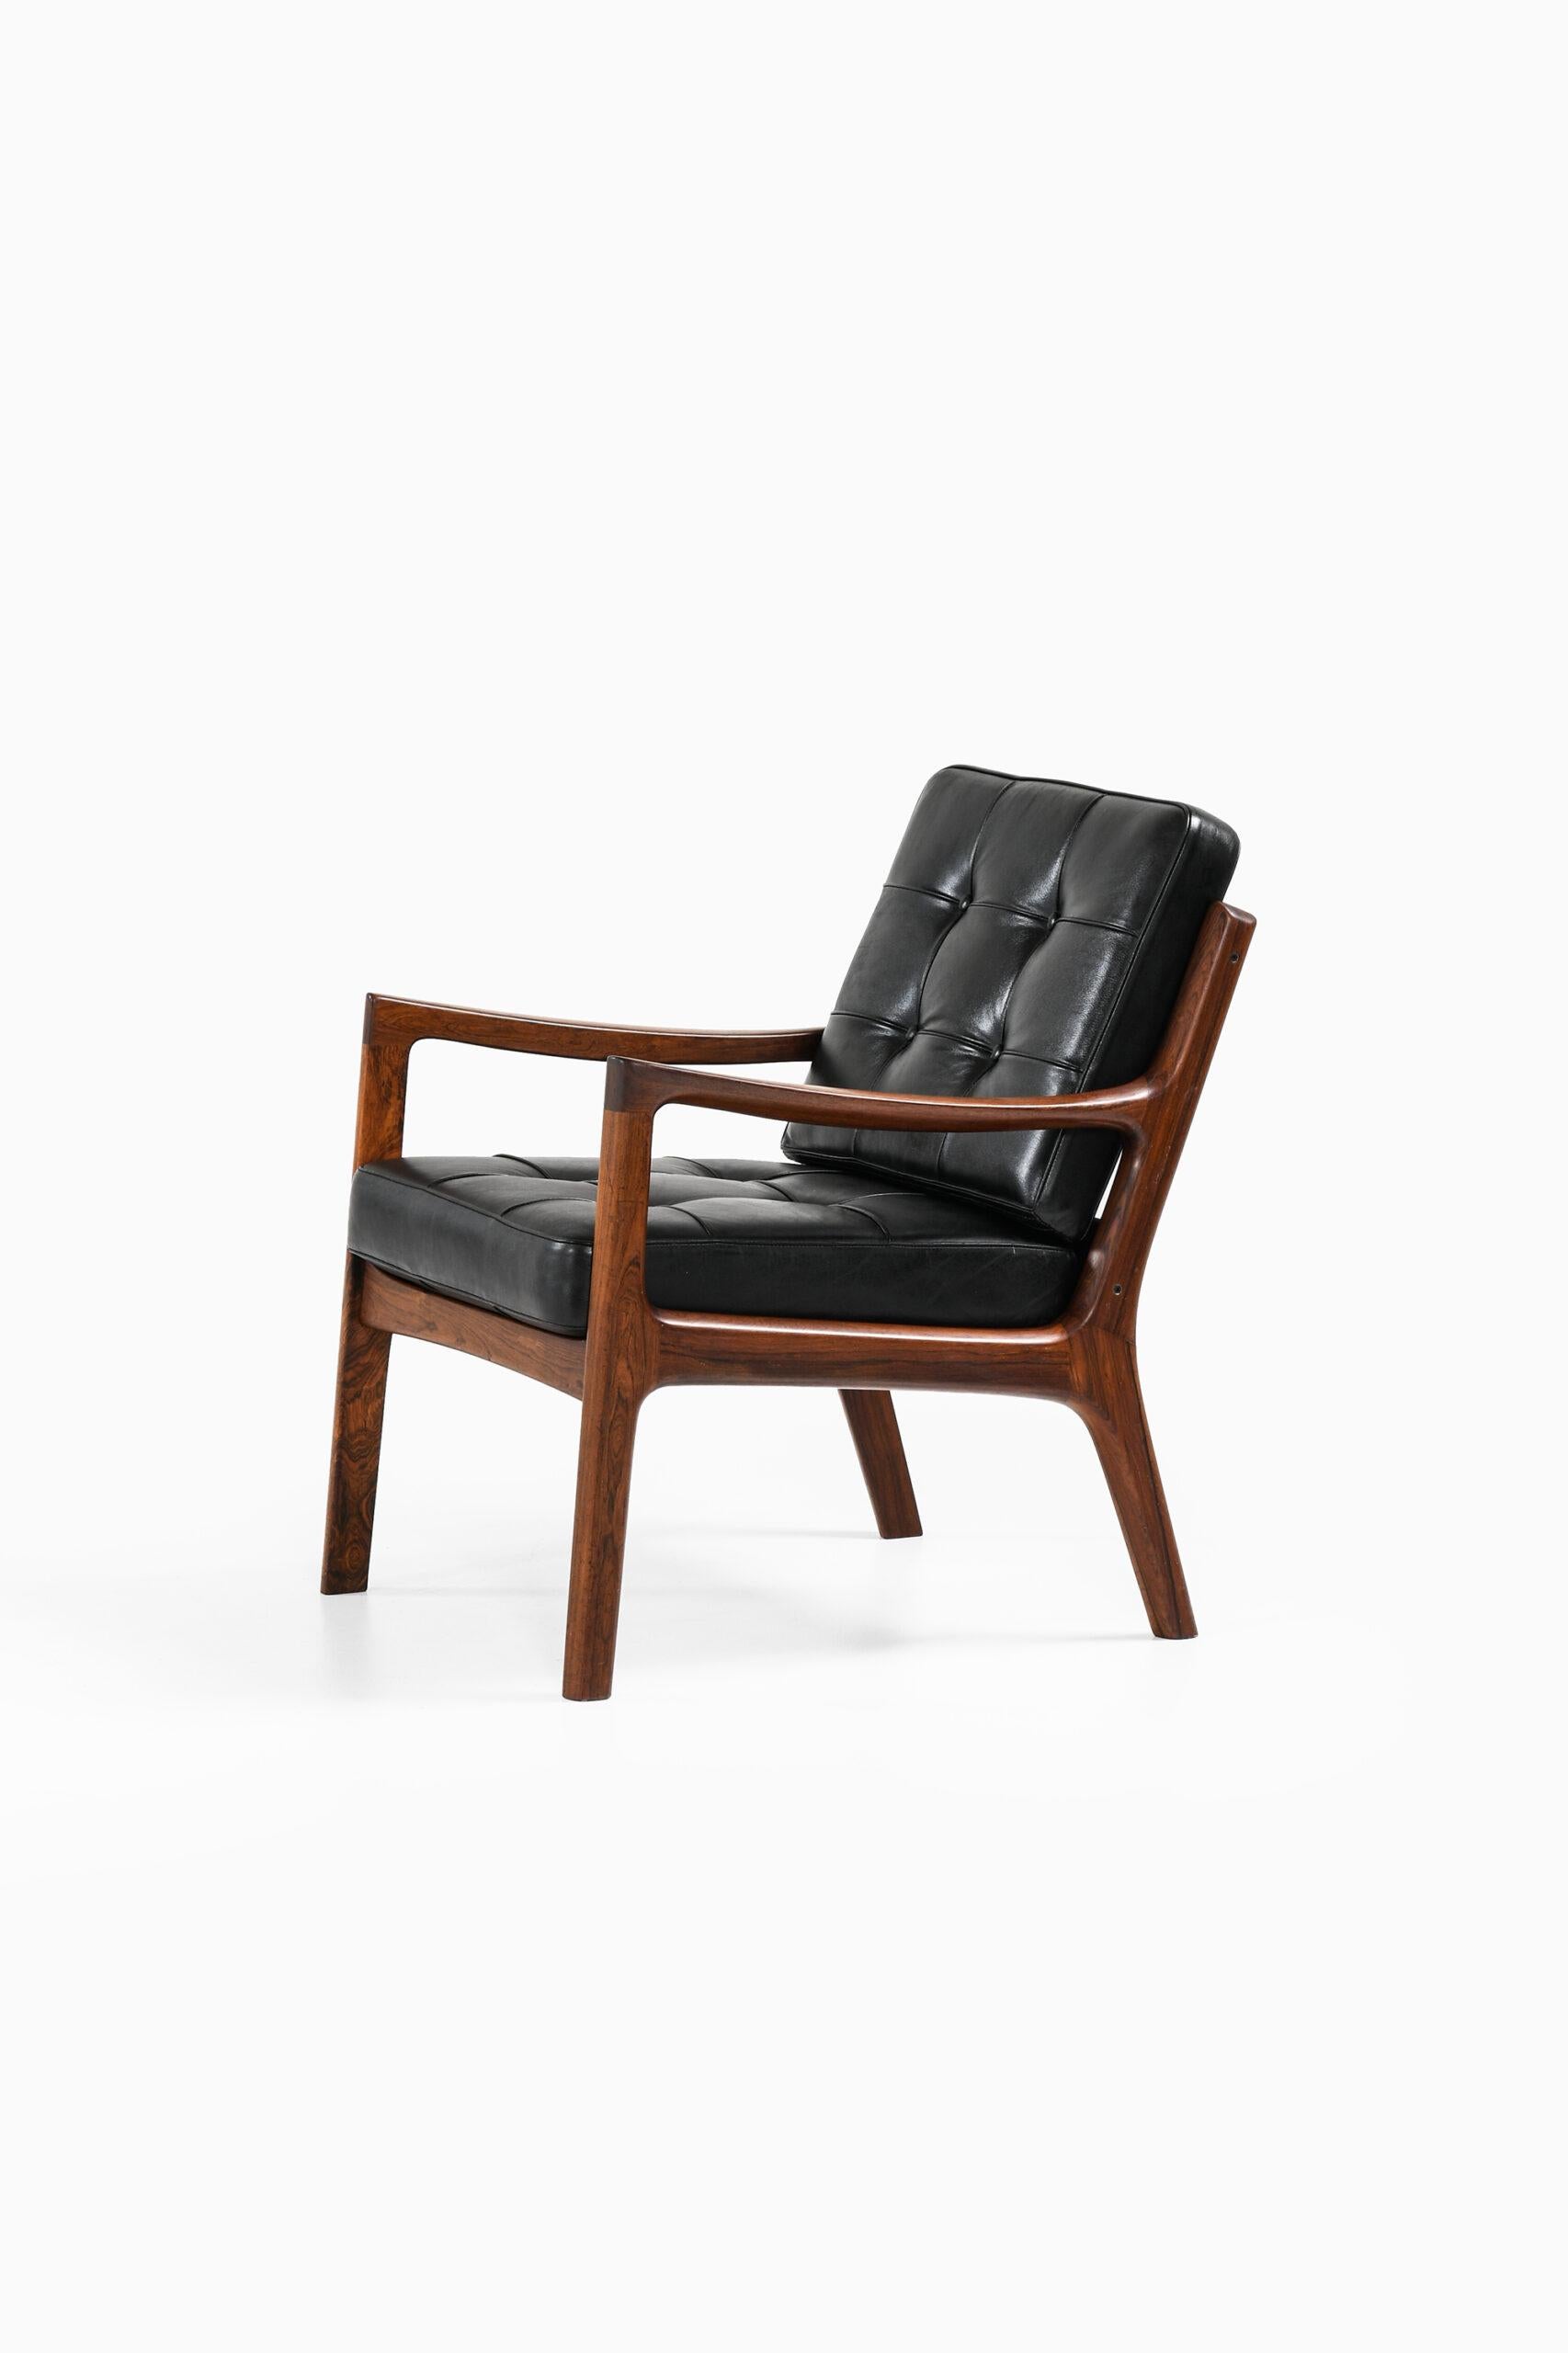 Easy chair model 116 / Senator designed by Ole Wanscher. Produced by France & Son in Denmark.